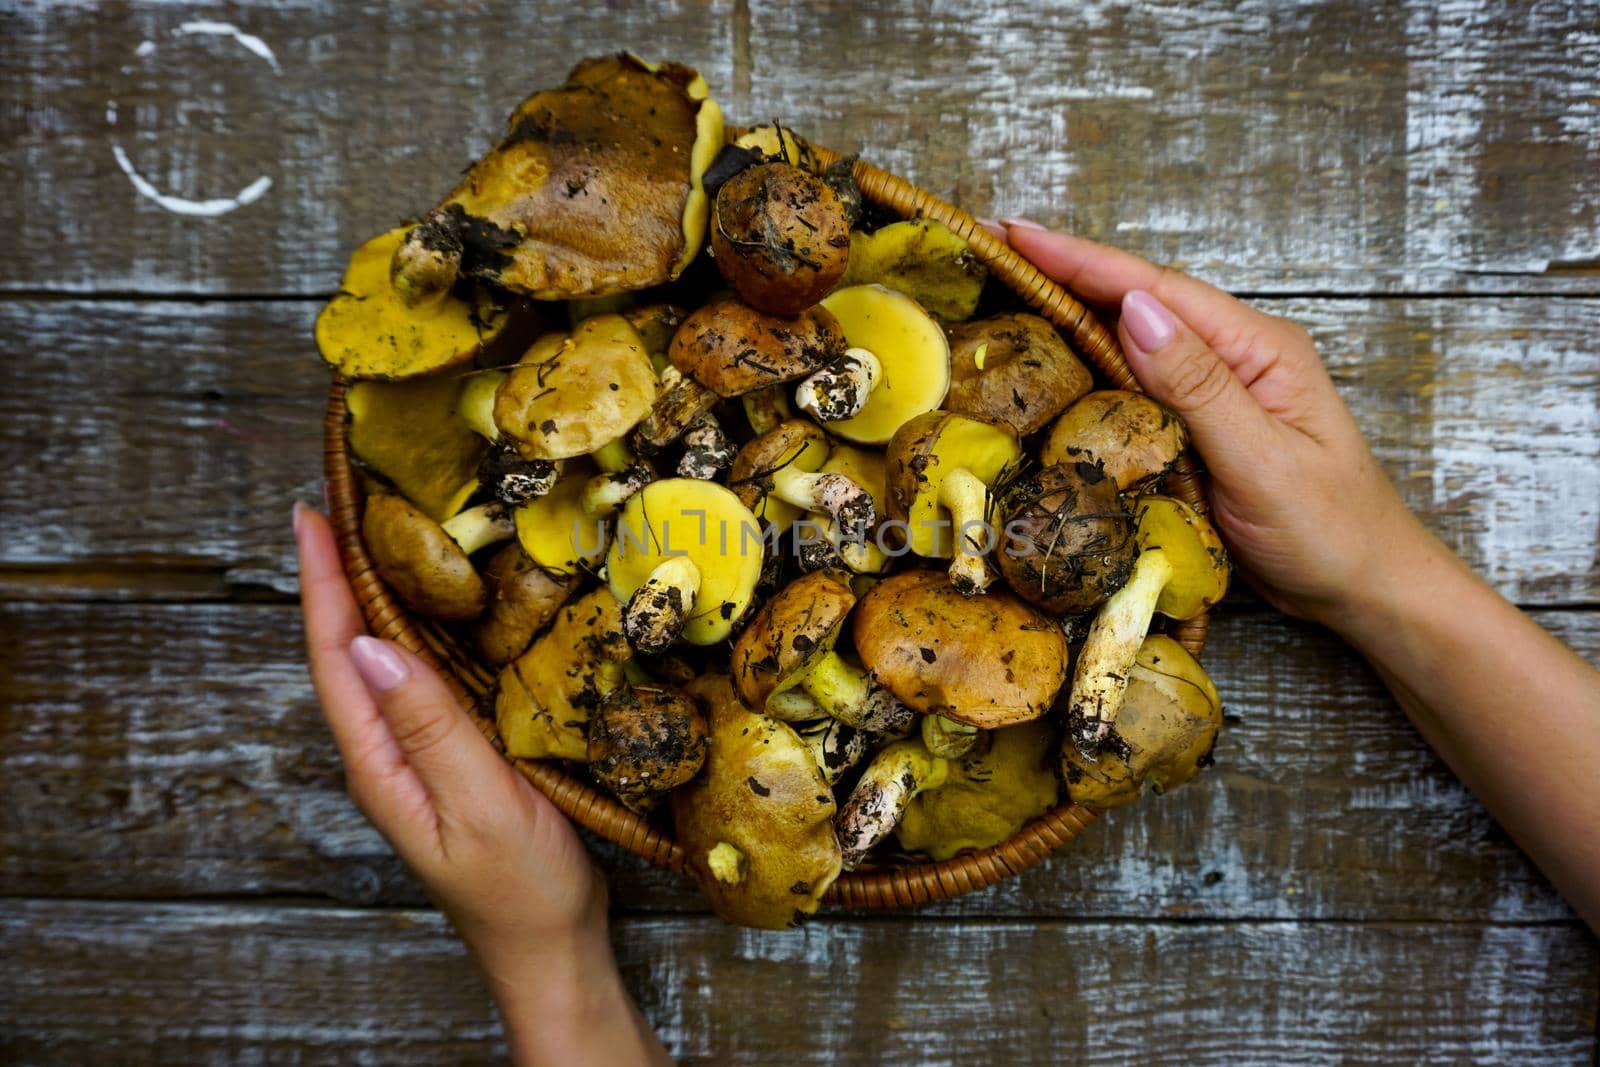 Women's hands hold a basket with freshly picked mushrooms by Spirina